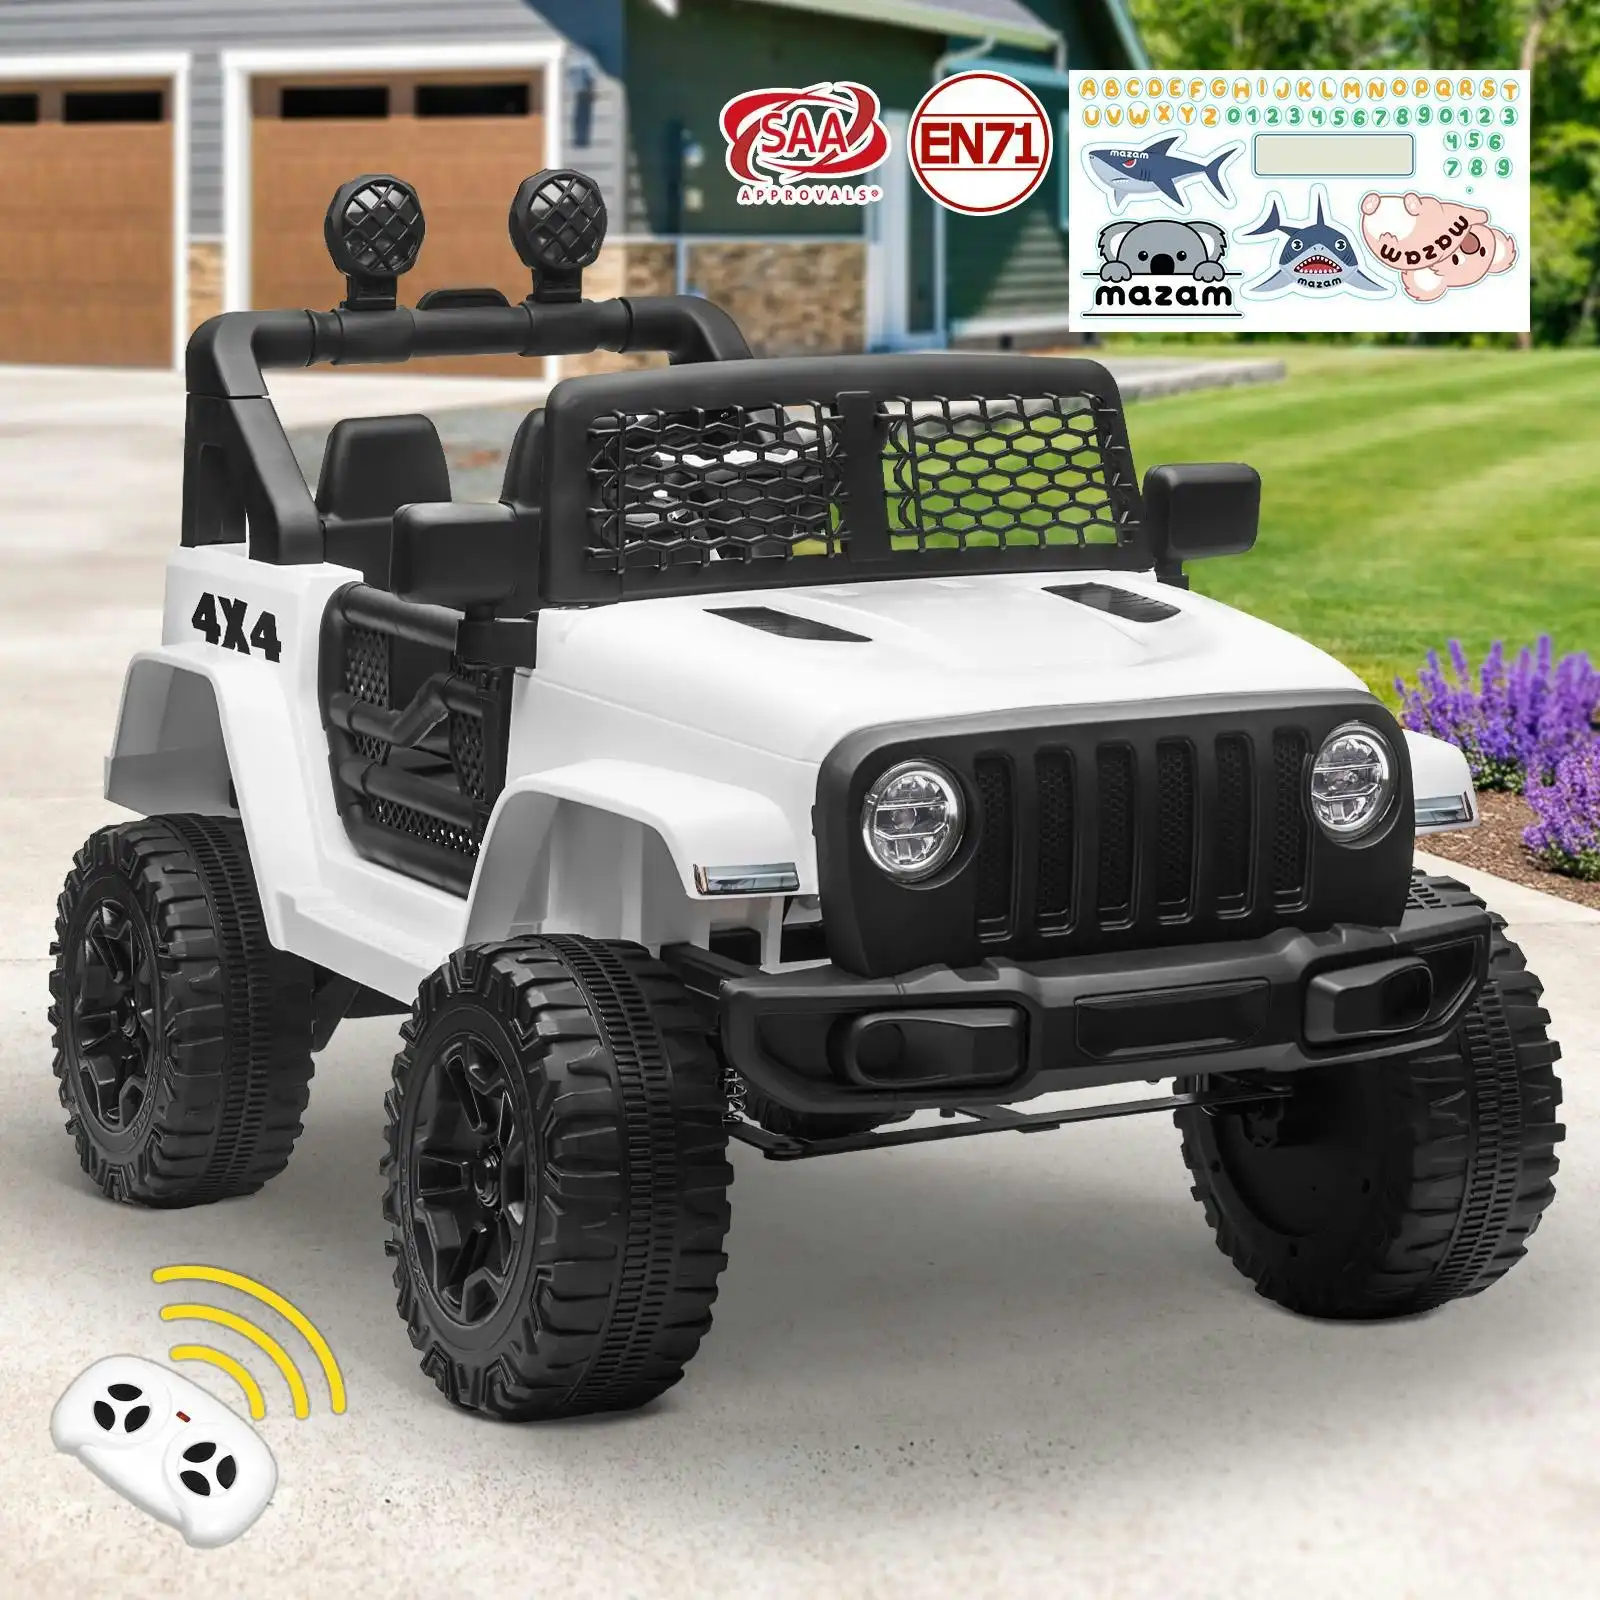 Mazam Kids Ride On Car Electric Toys Jeep 12V Remote Vehicle Car Gift White